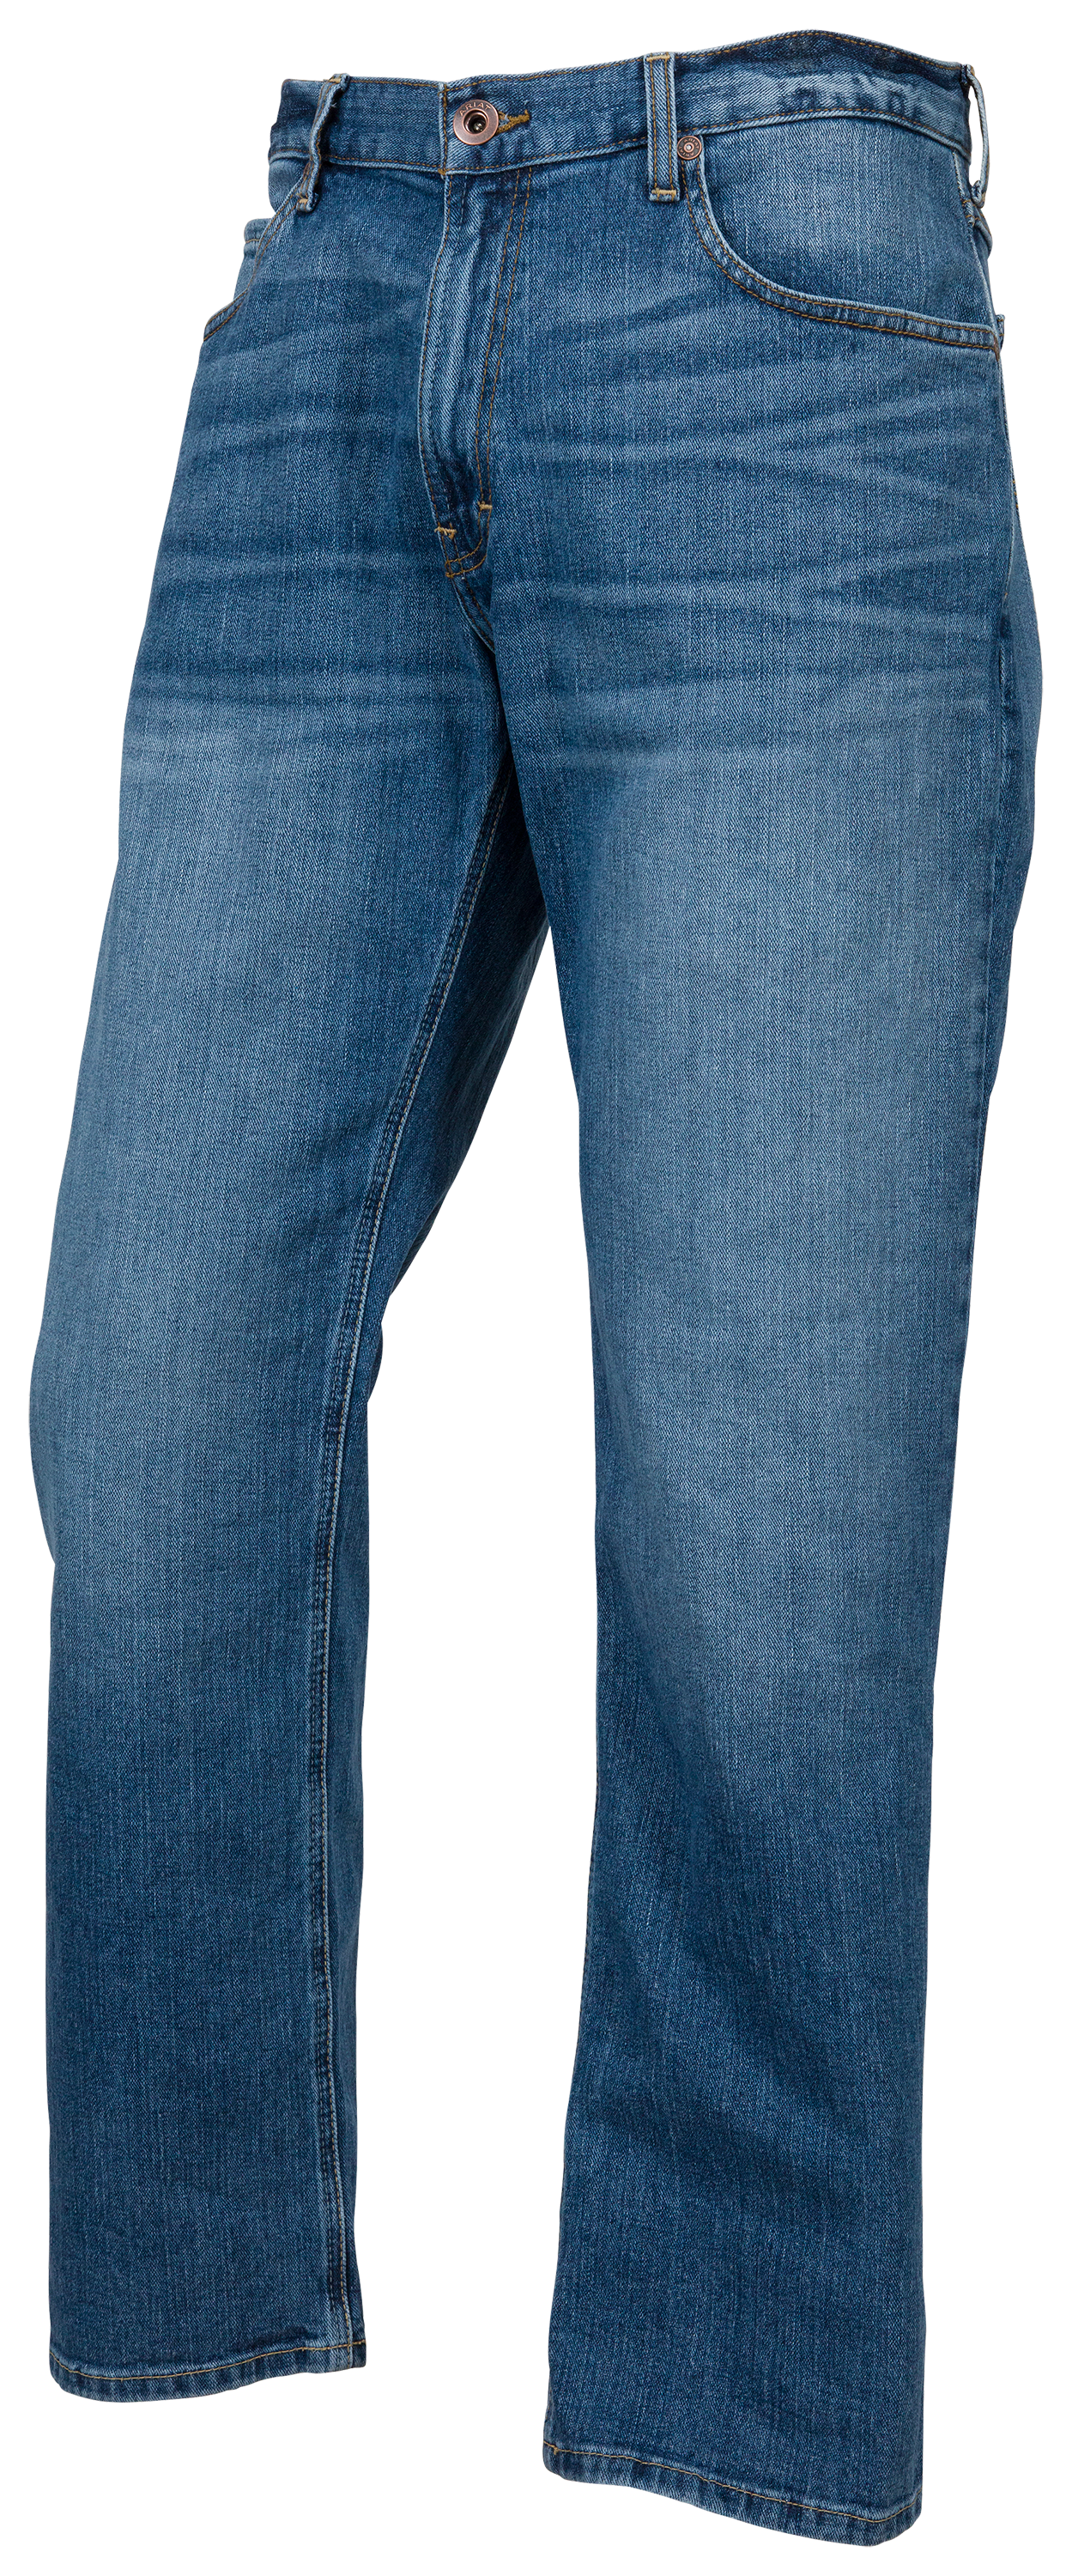 Men's Ariat M2 Traditional Relaxed Cutler Boot Cut Jeans - The Boot Store